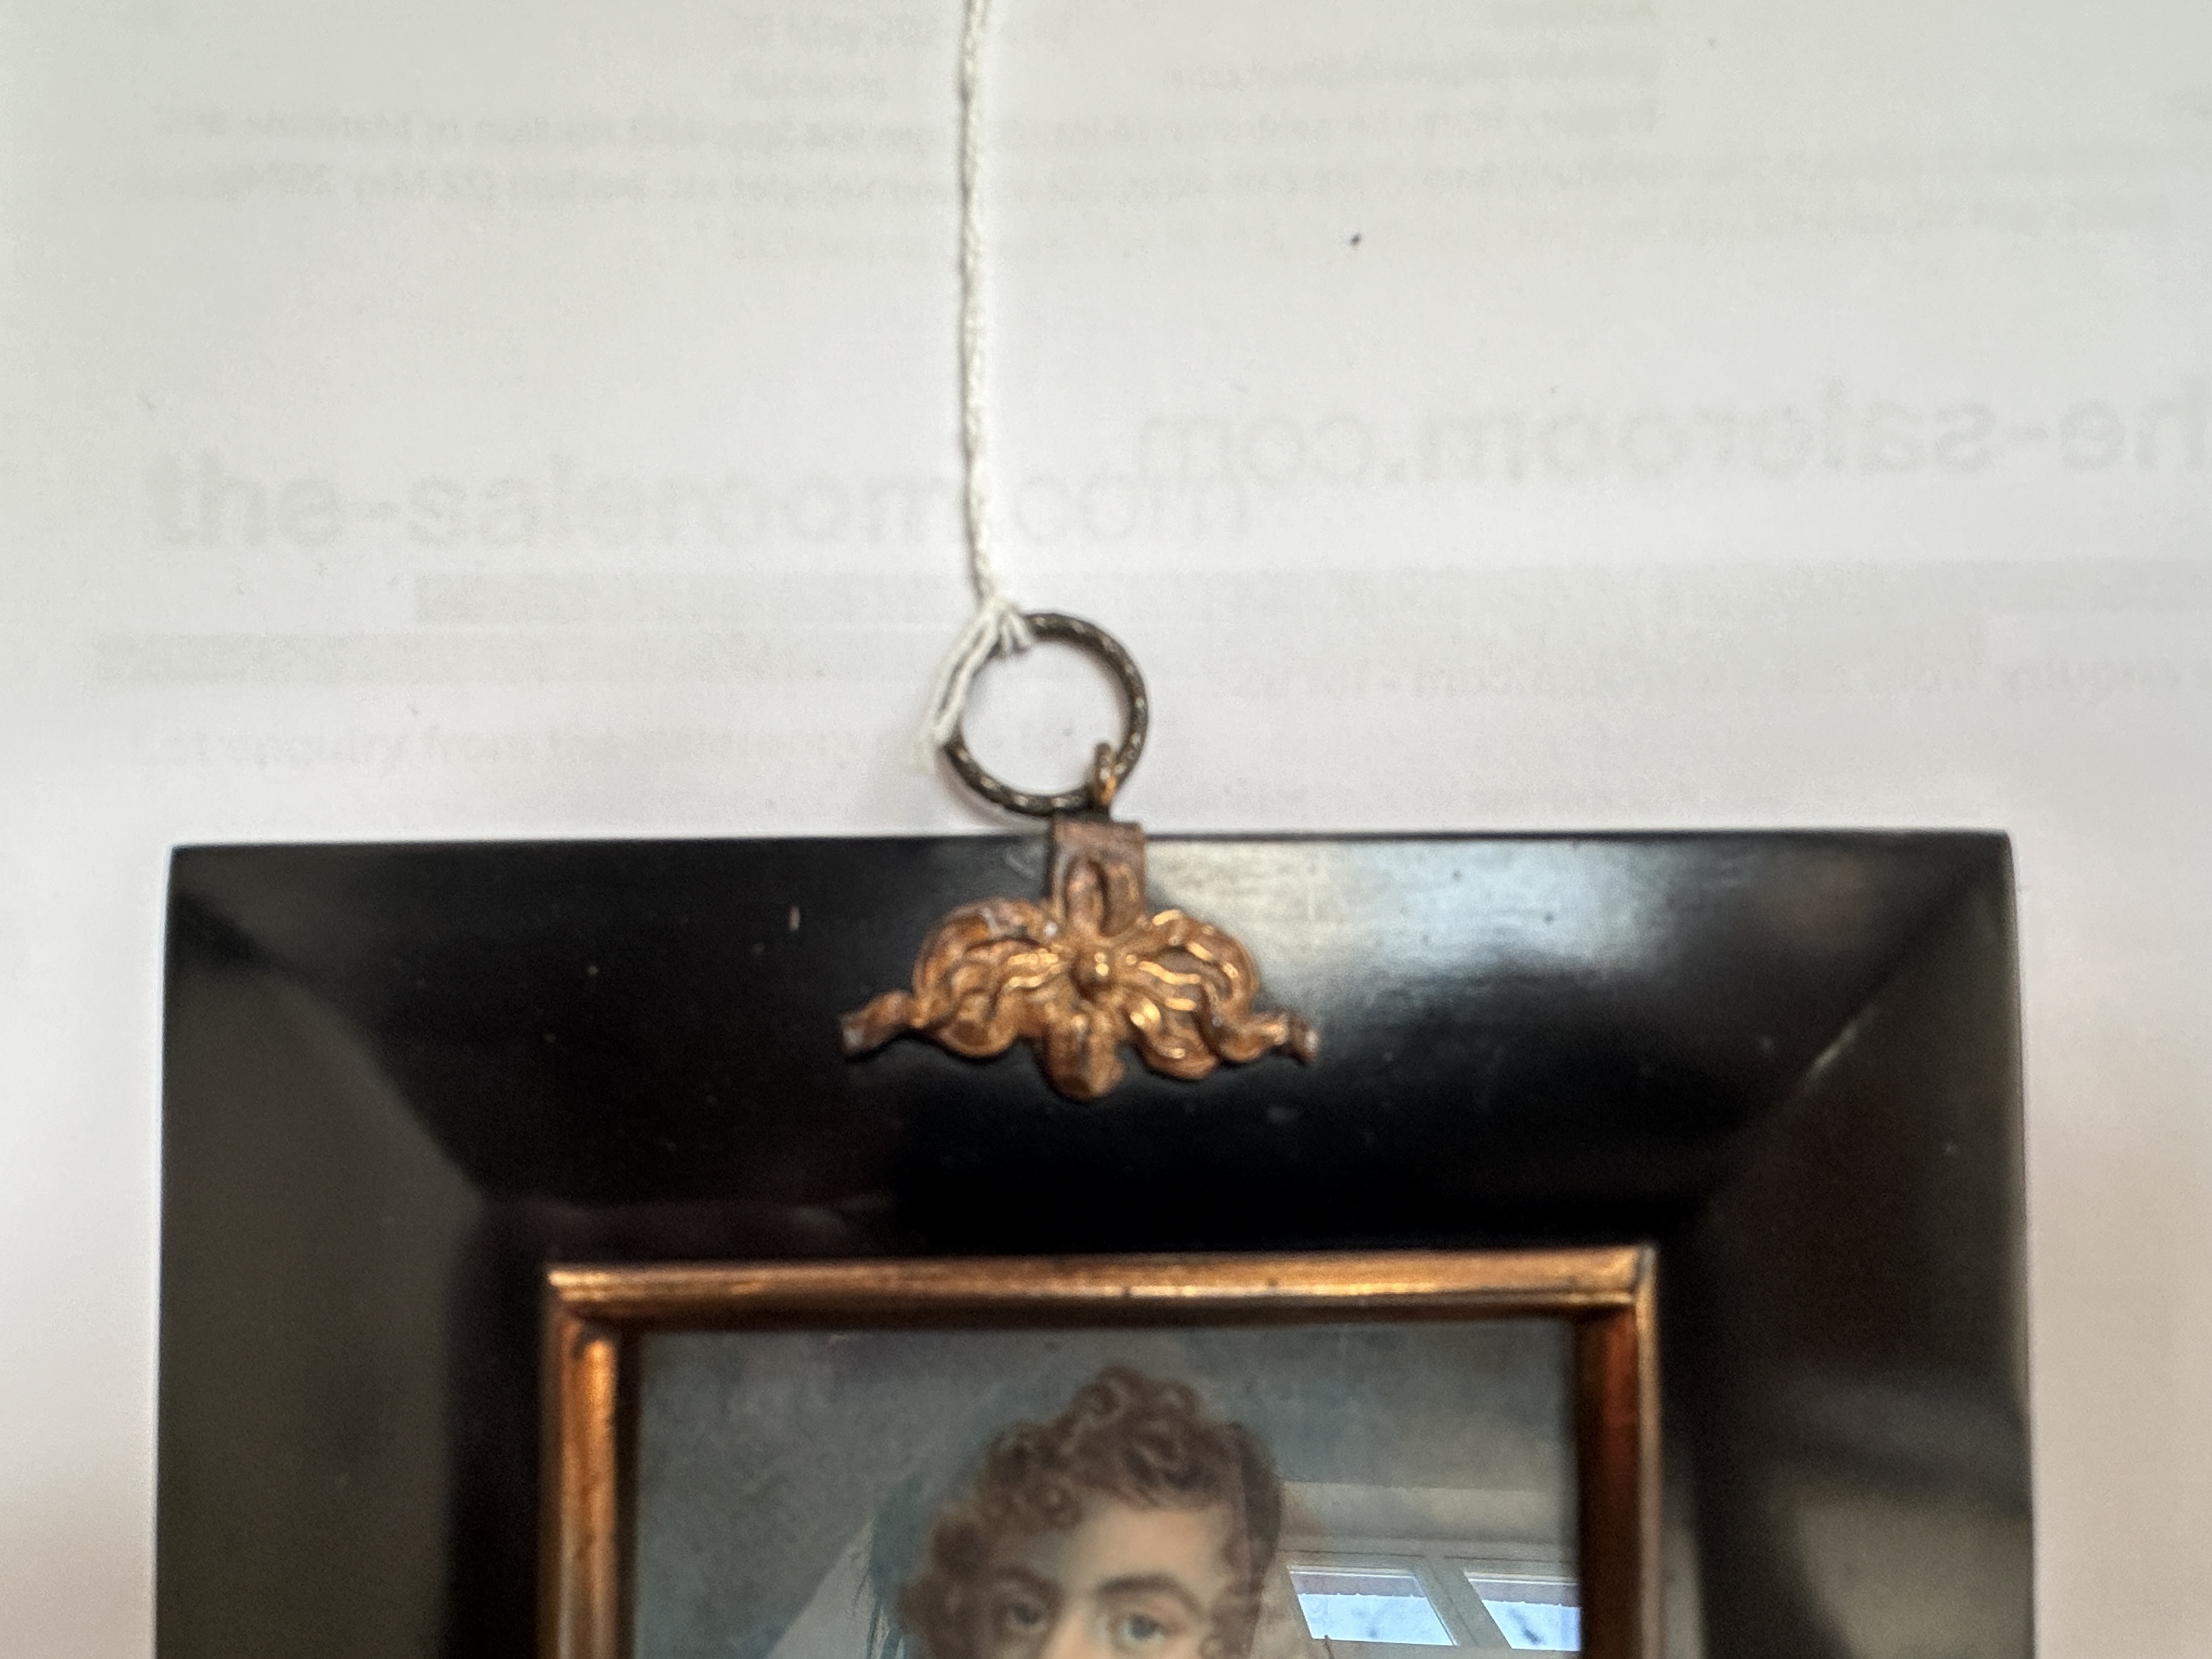 A Mid-19th century portrait miniature of a Naval Commander or Captain, with long curly brown hair - Image 5 of 7